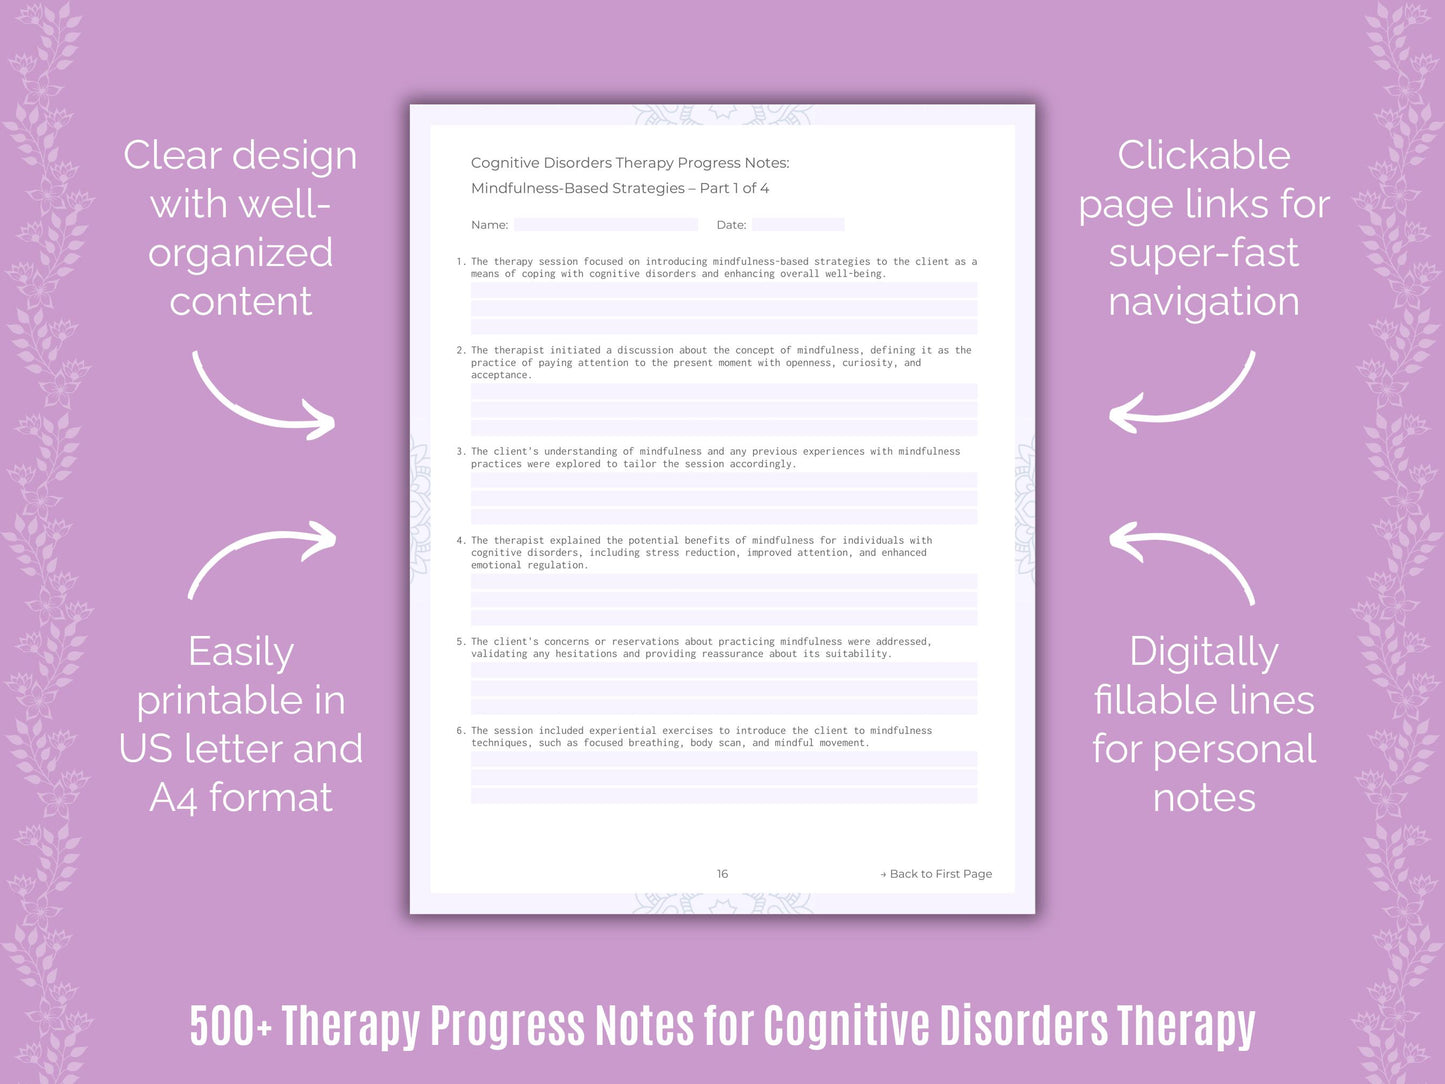 Cognitive Disorders Therapy